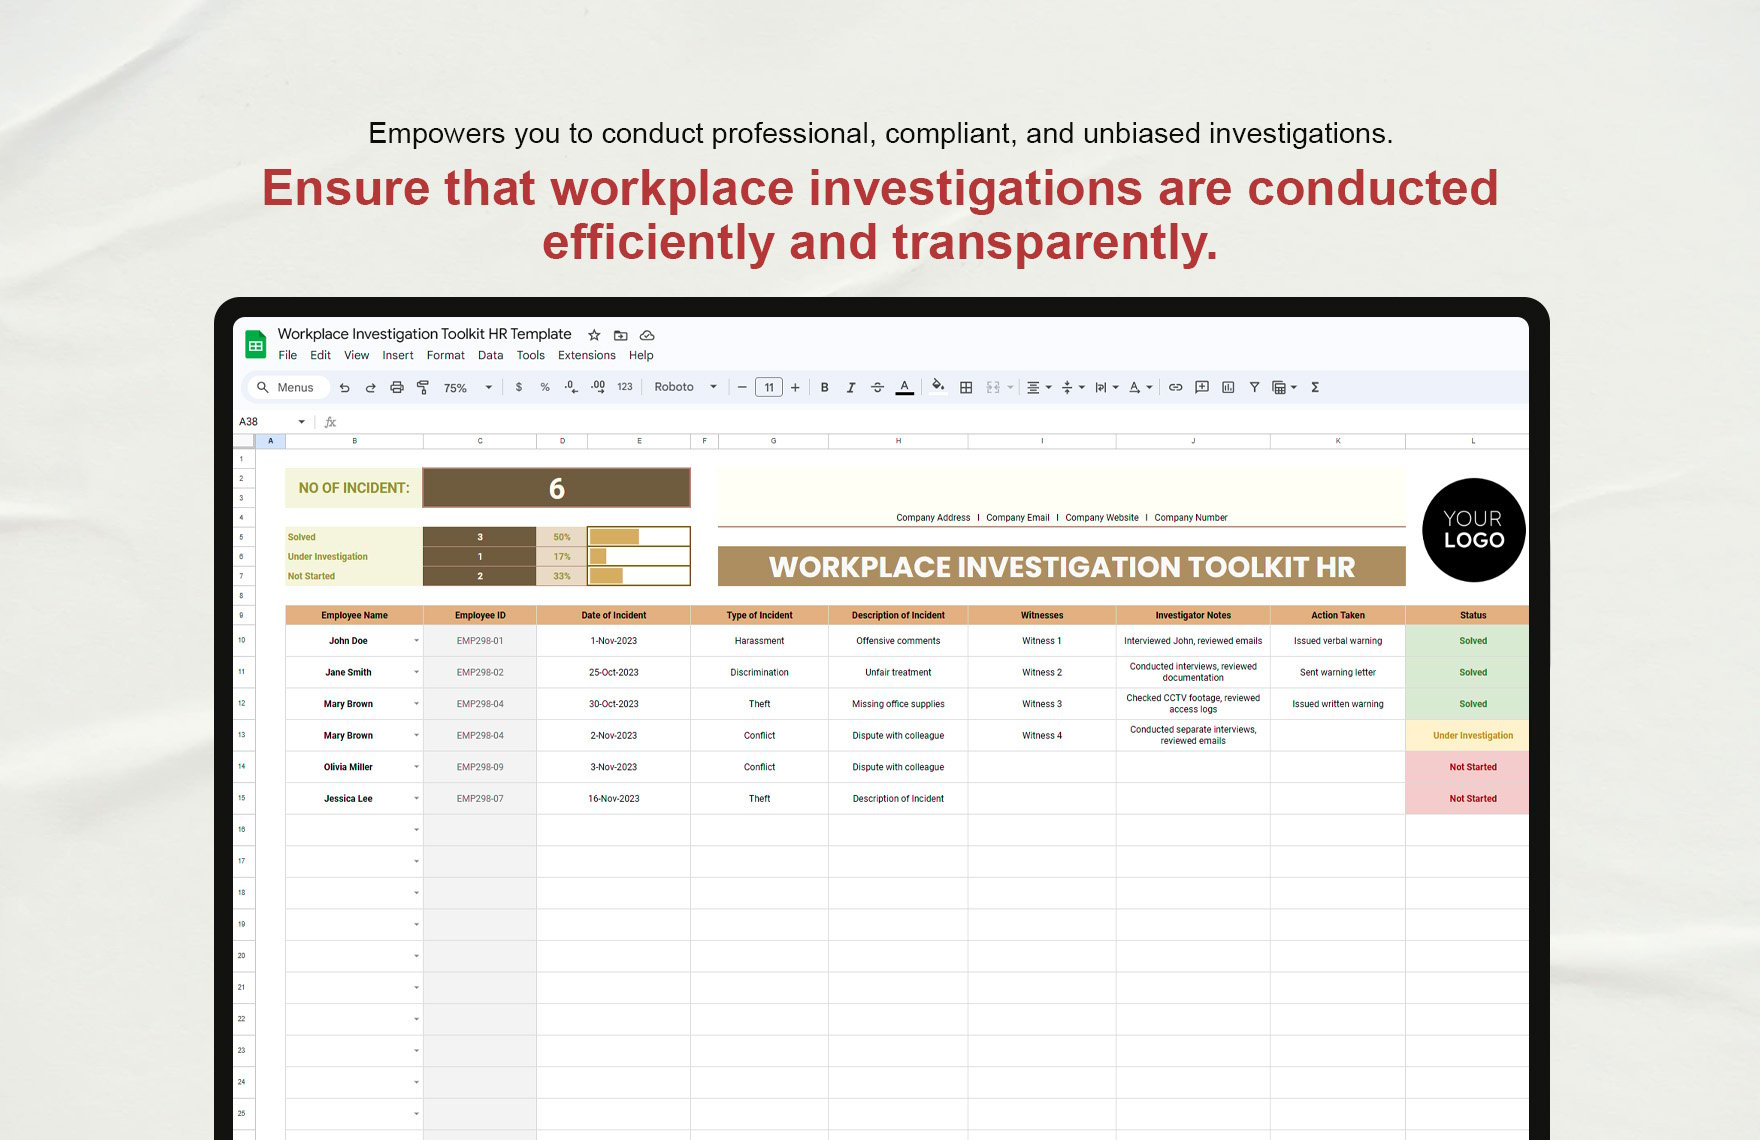 Workplace Investigation Toolkit HR Template